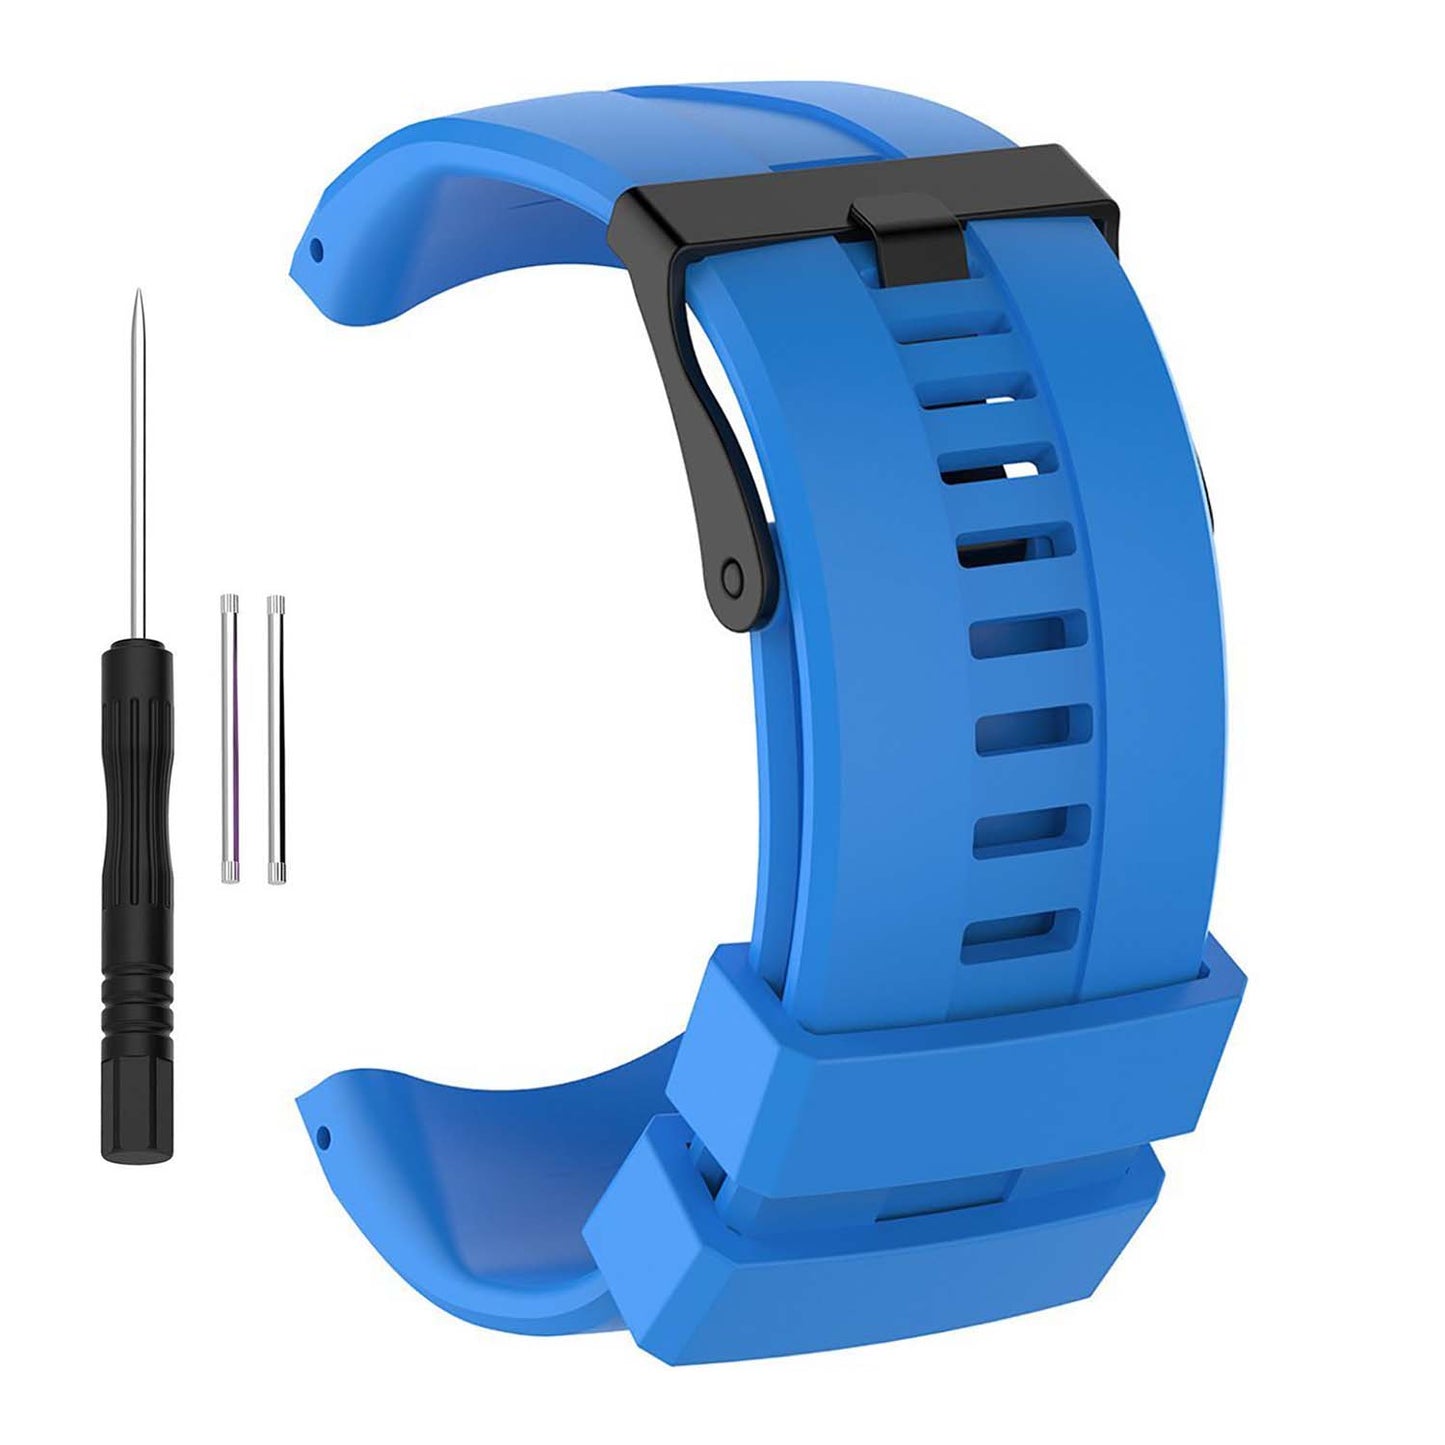 Replacement Band for Polar v800 GPS Sports Watch